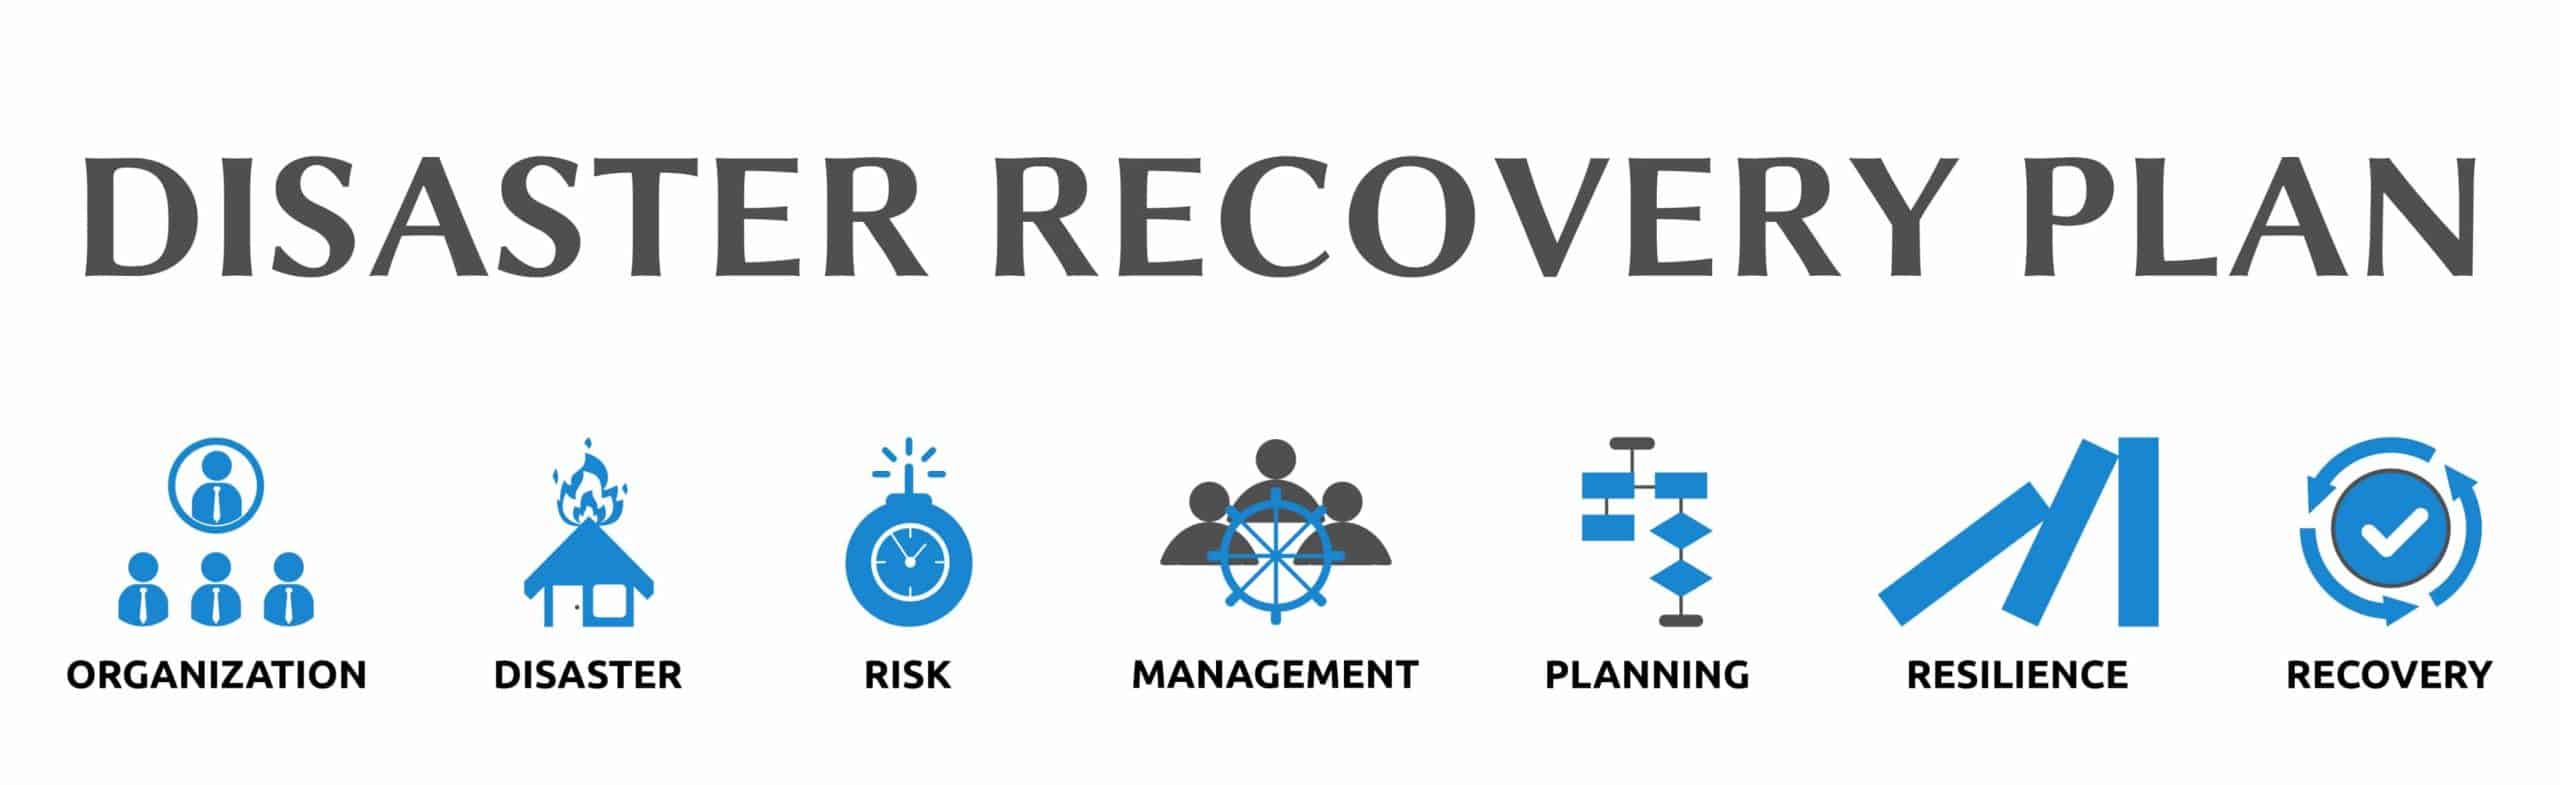 disaster-recovery-plan-ccnytech (1)